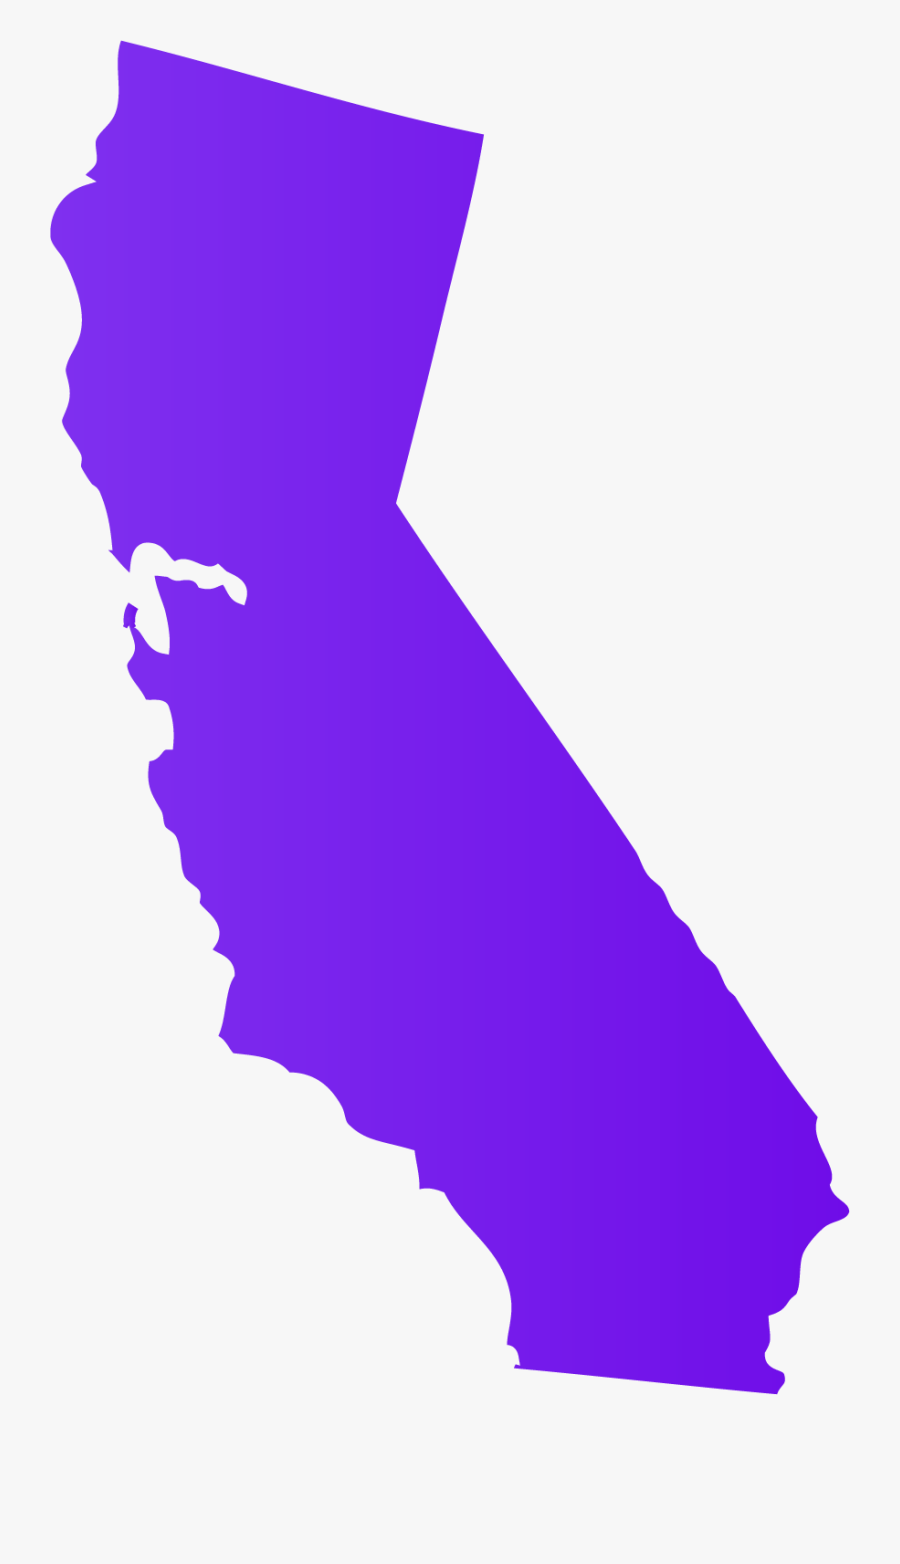 Free Icon Download Search - California State Clipart, Transparent Clipart